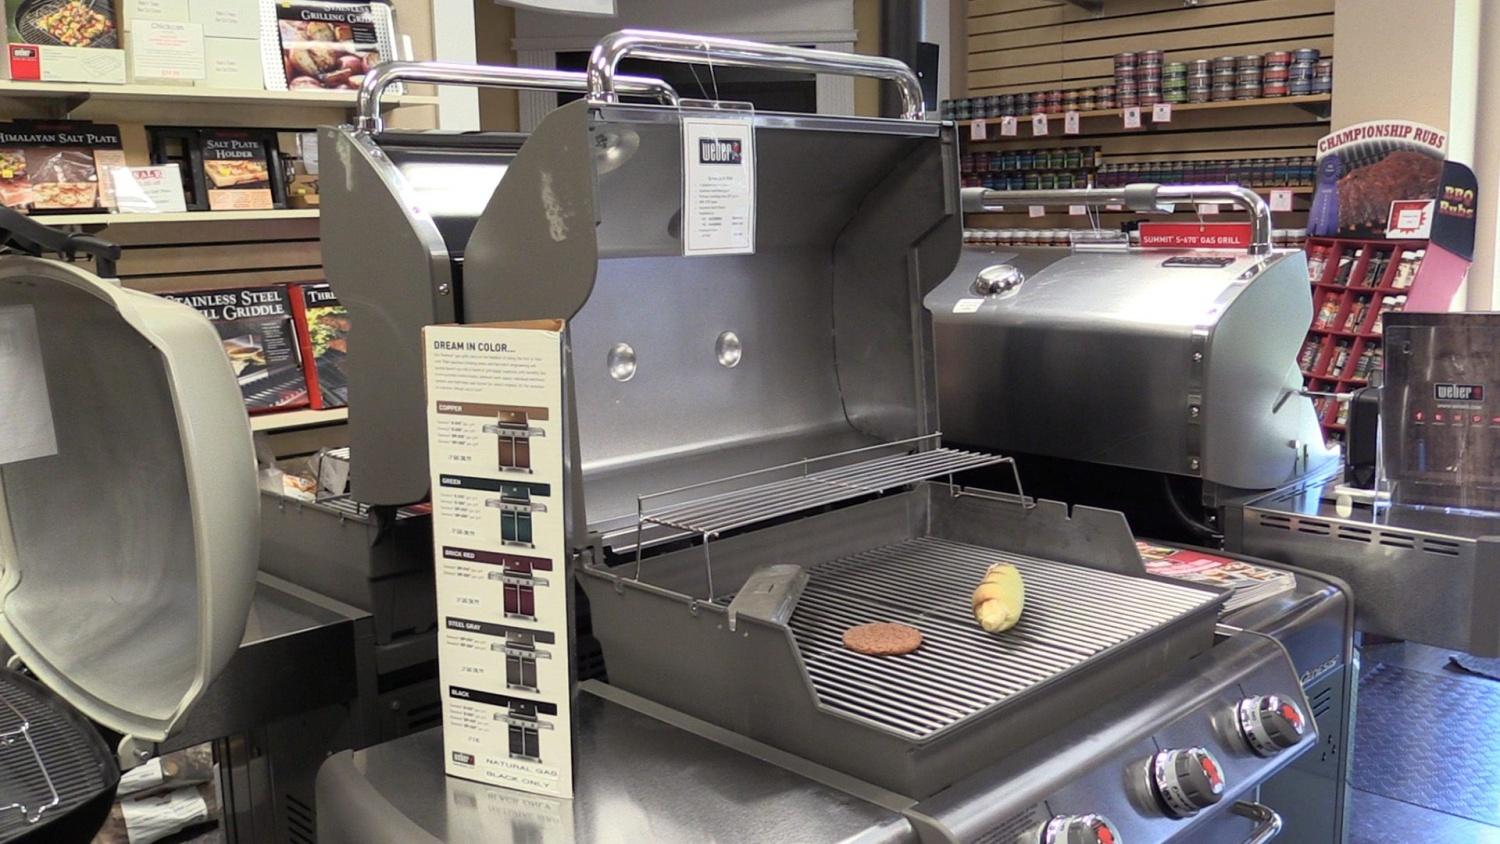 Get the best deals on BBQ grills and accessories in West Long Branch